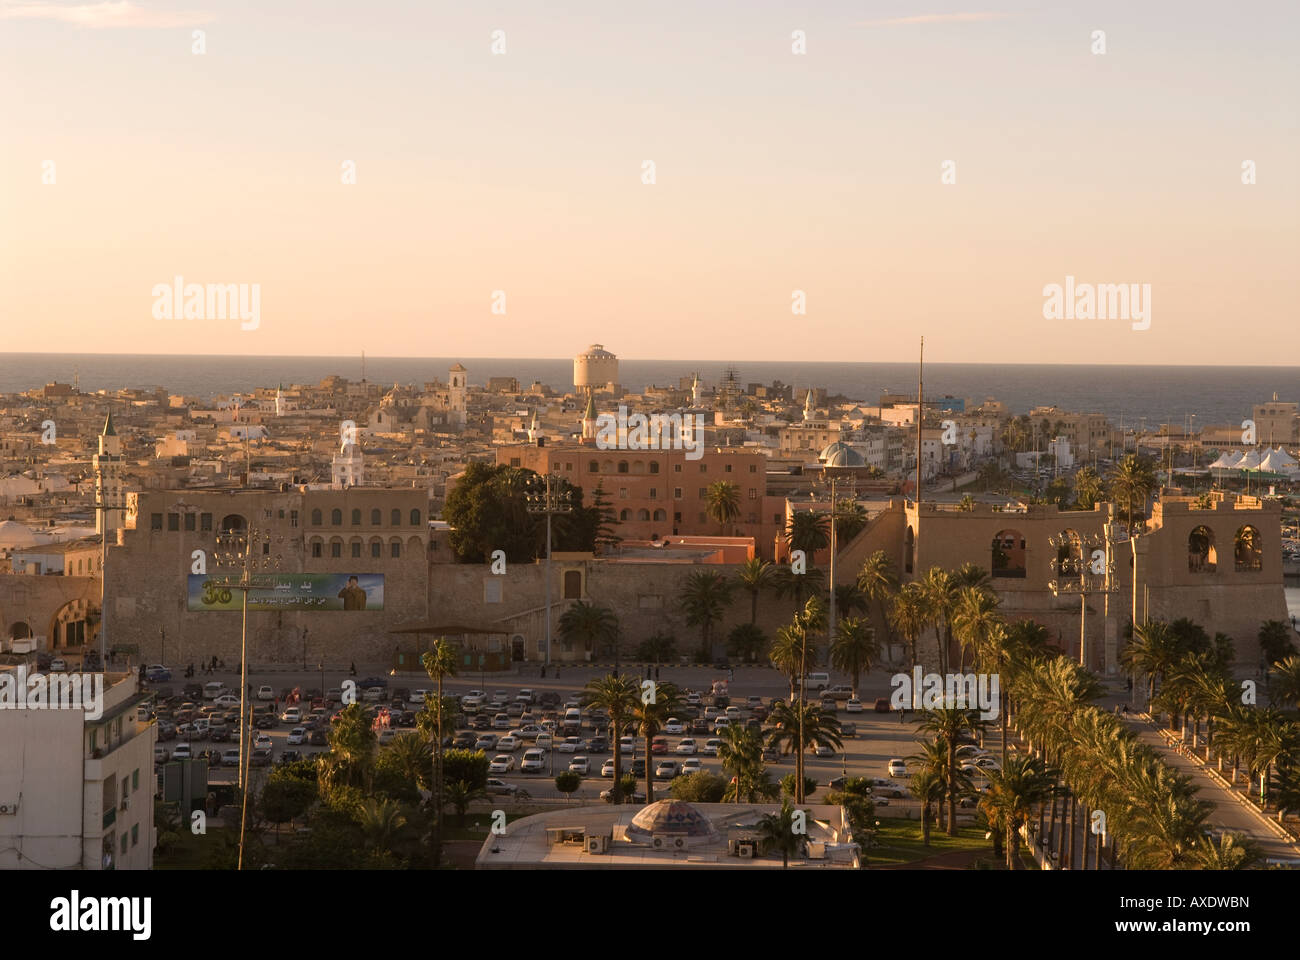 General view over the city of Tripoli Stock Photo